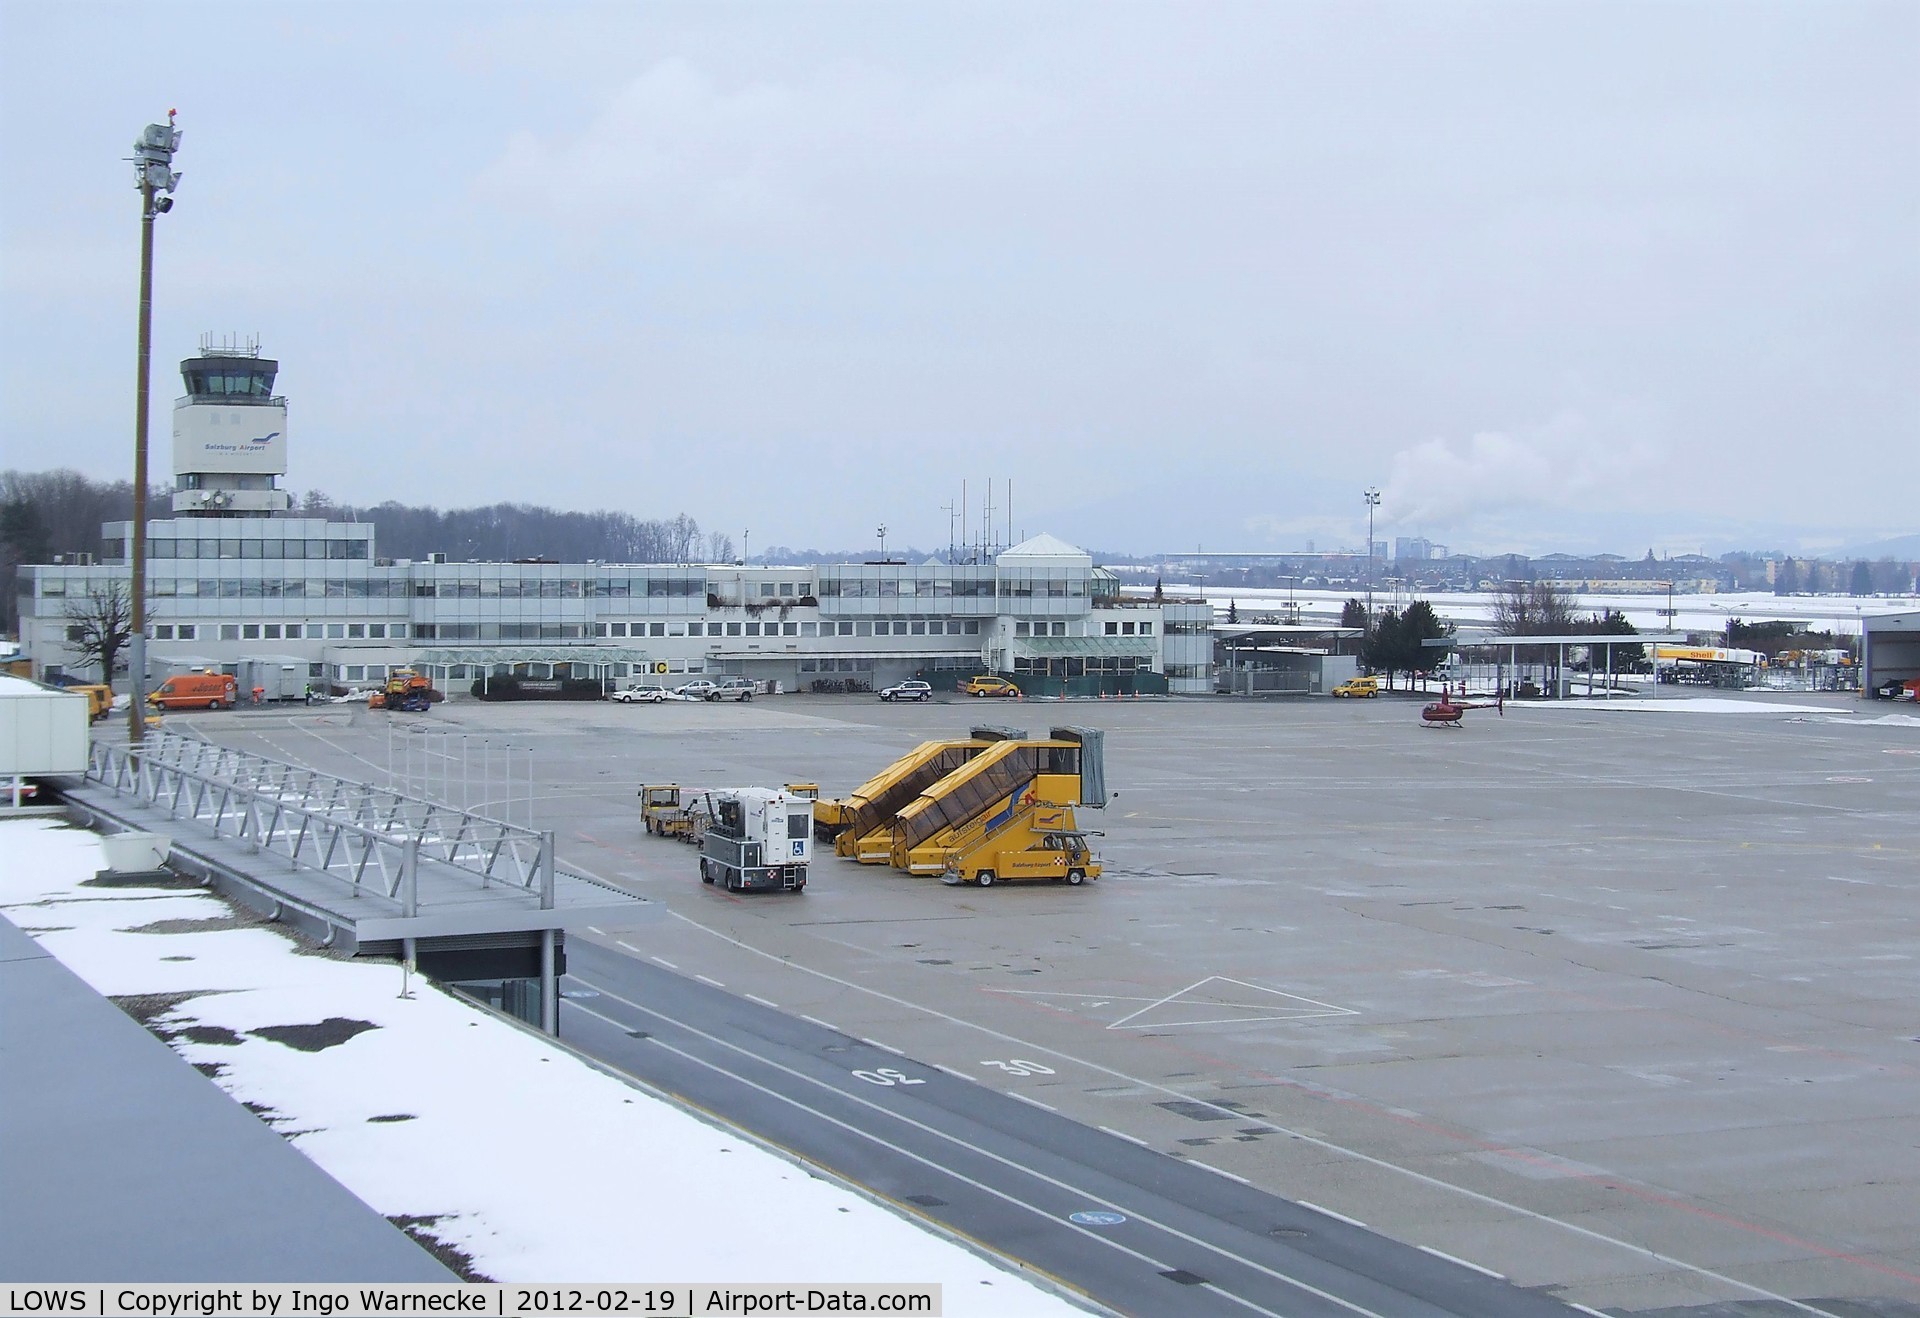 Salzburg Airport, Salzburg Austria (LOWS) - apron and airport buildings with tower at Salzburg W.A.Mozart airport